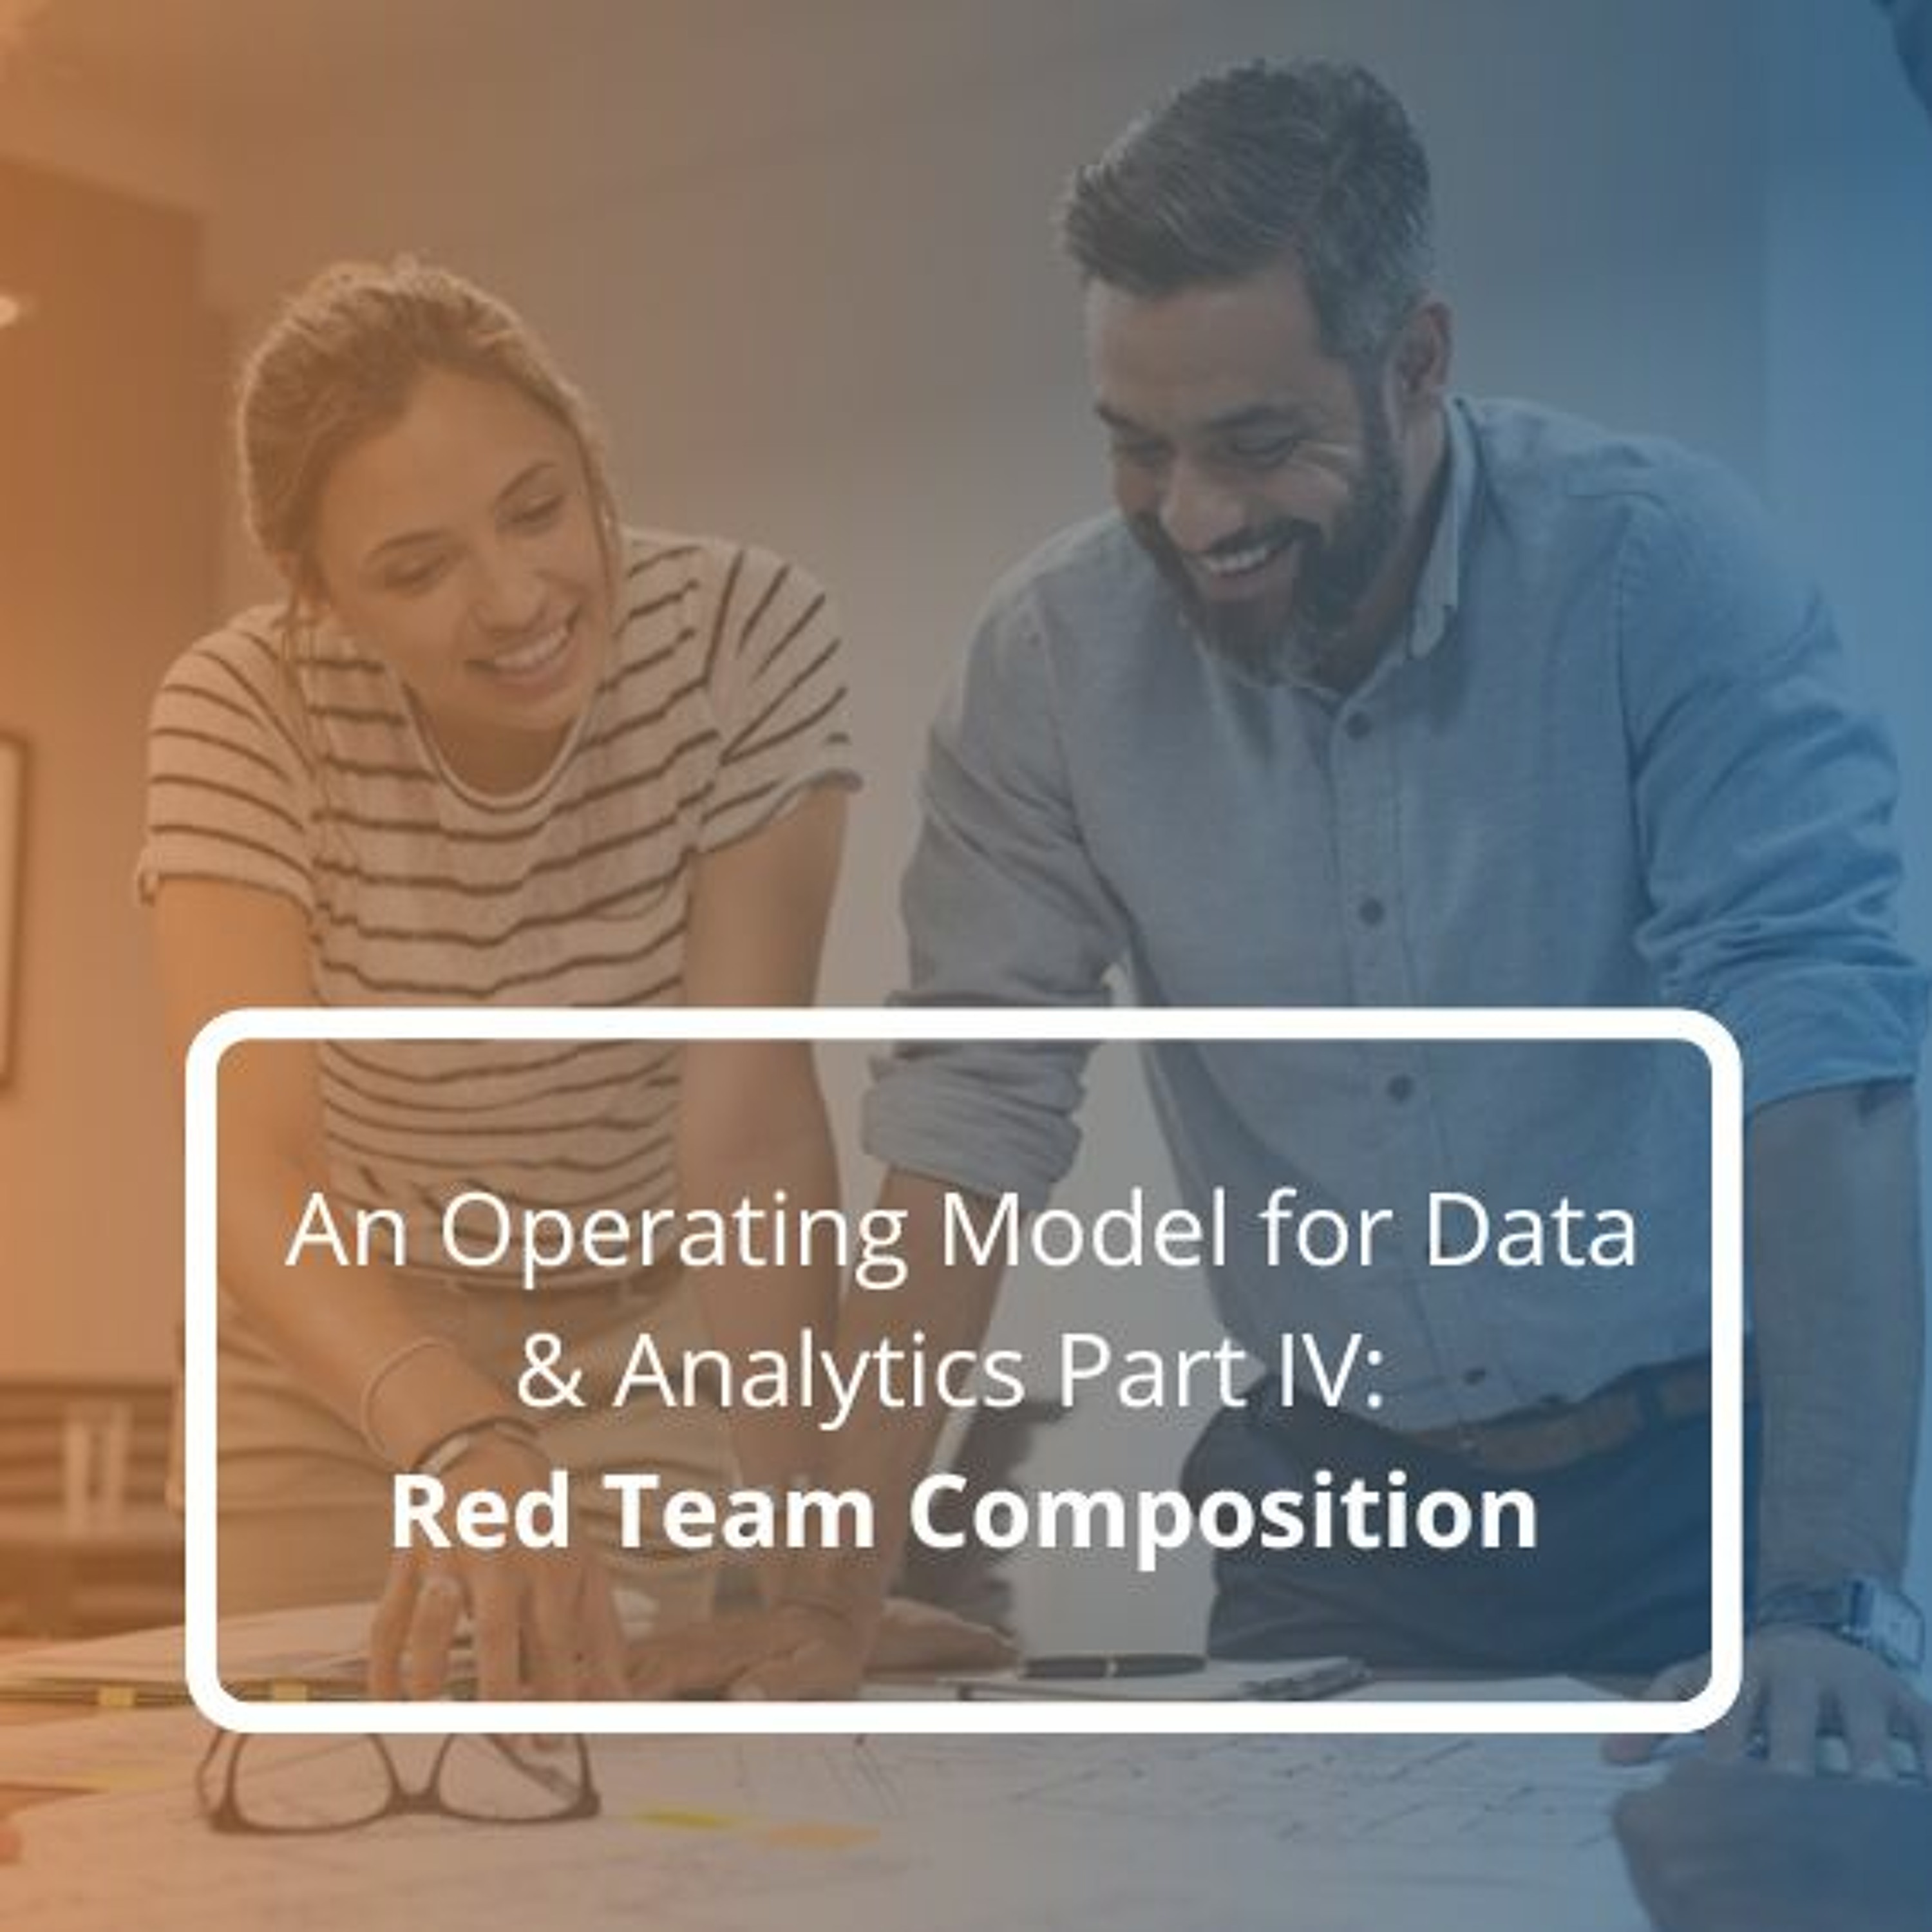 An Operating Model For Data & Analytics Part IV: Red Team Composition - Audio Blog